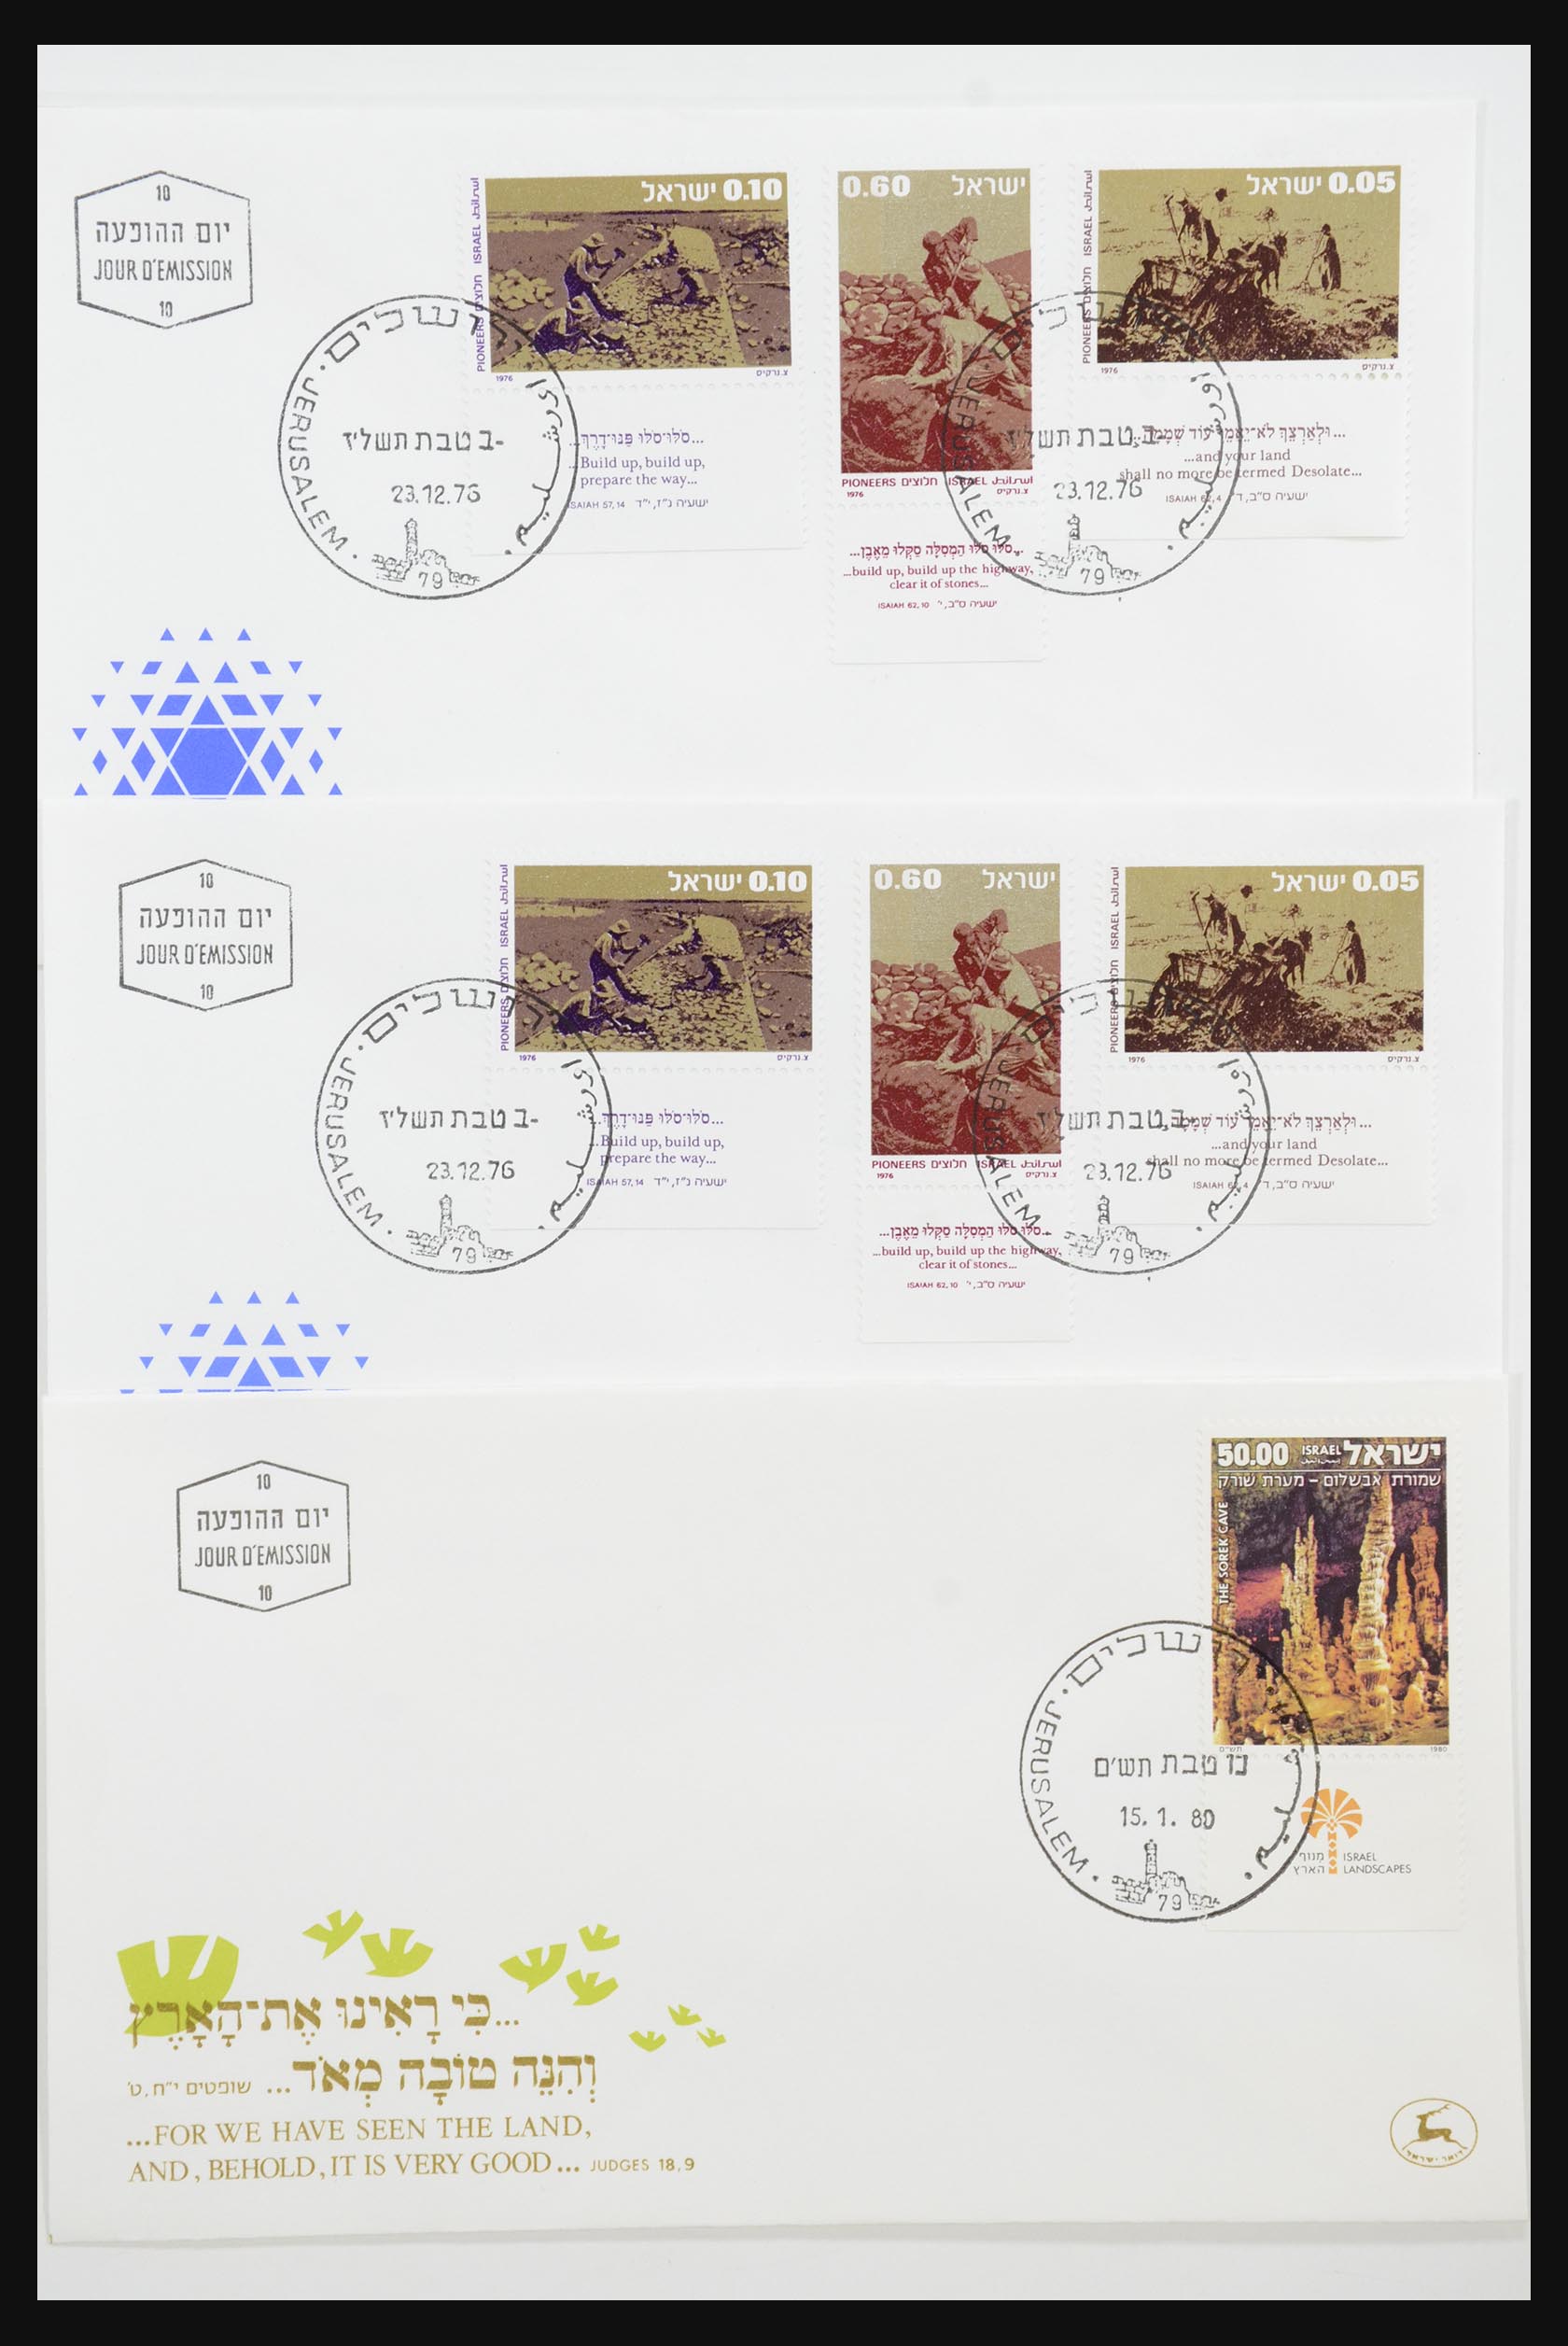 31924 004 - 31924 Israël fdc-collectie 1957-2003.